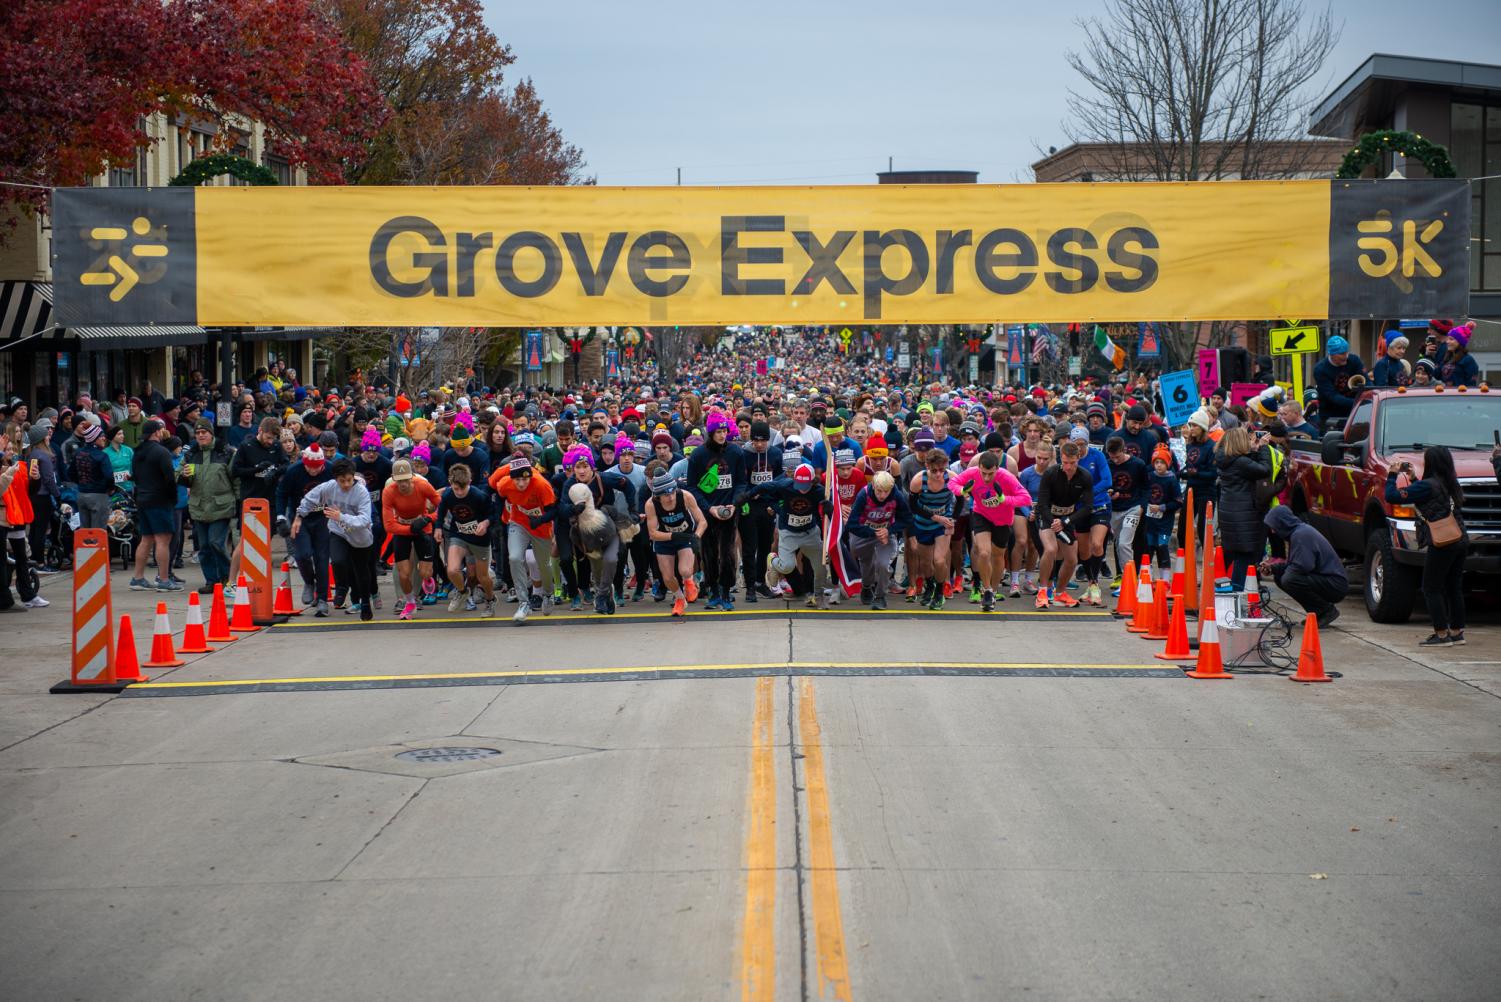 Grove Express Community Tradition Continues Under New Name and